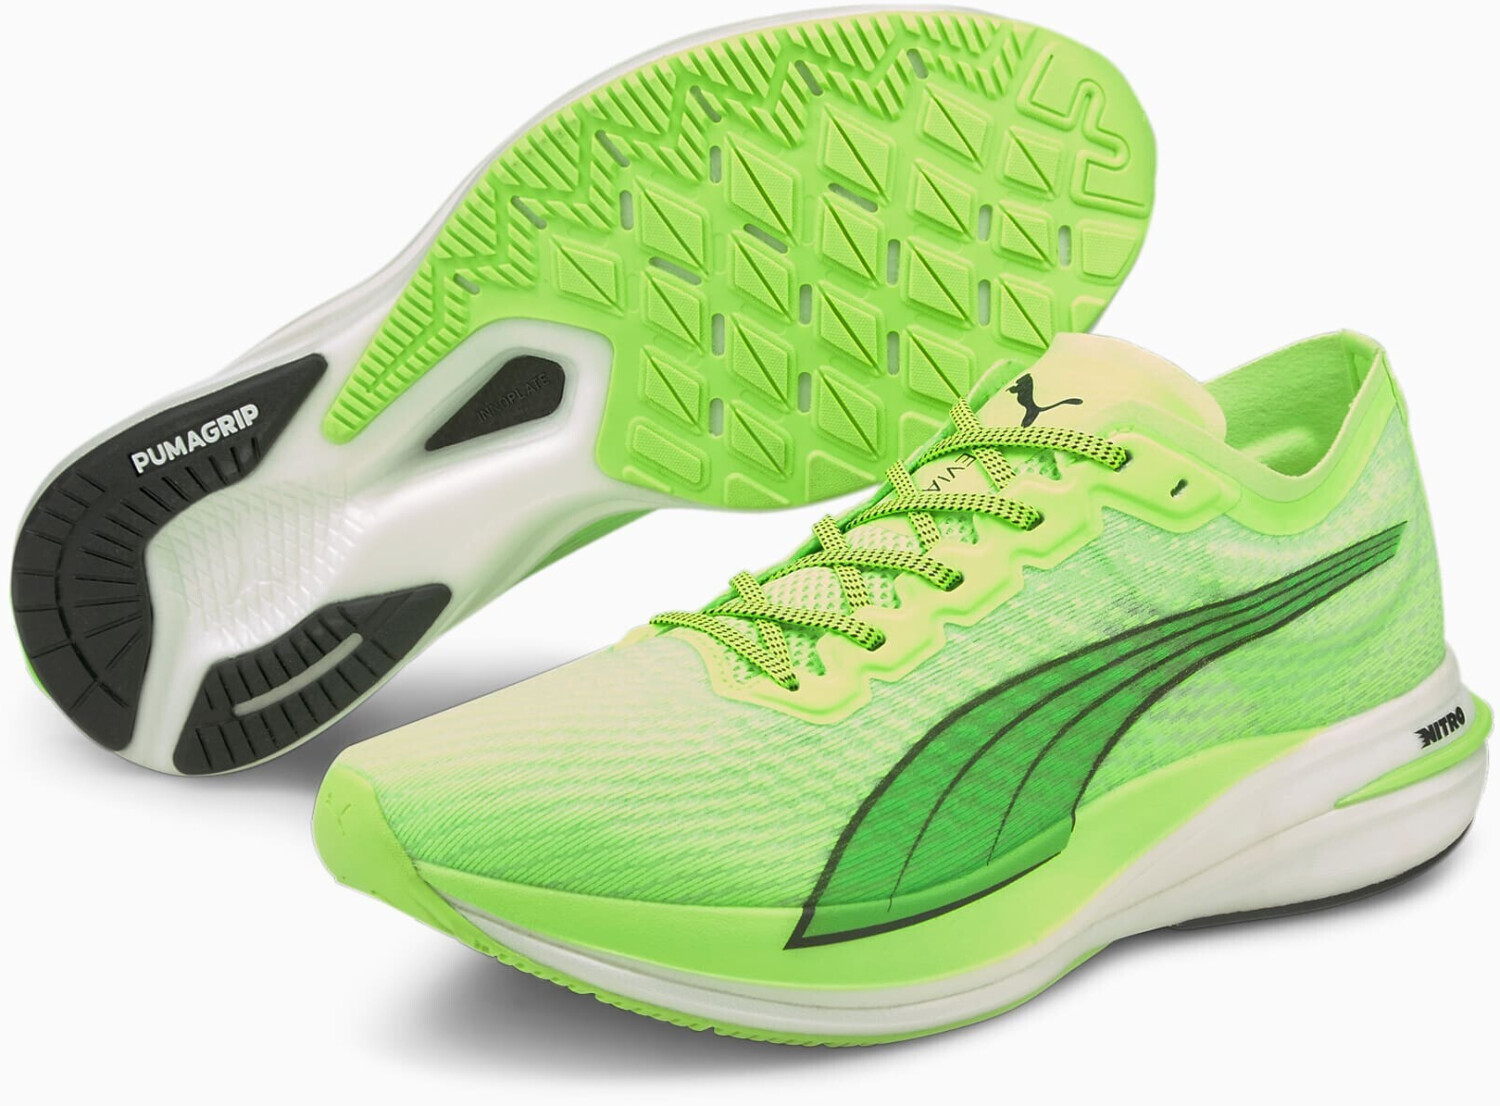 Buy Puma Deviate Nitro green glare from £94.99 (Today) – Best Deals on ...